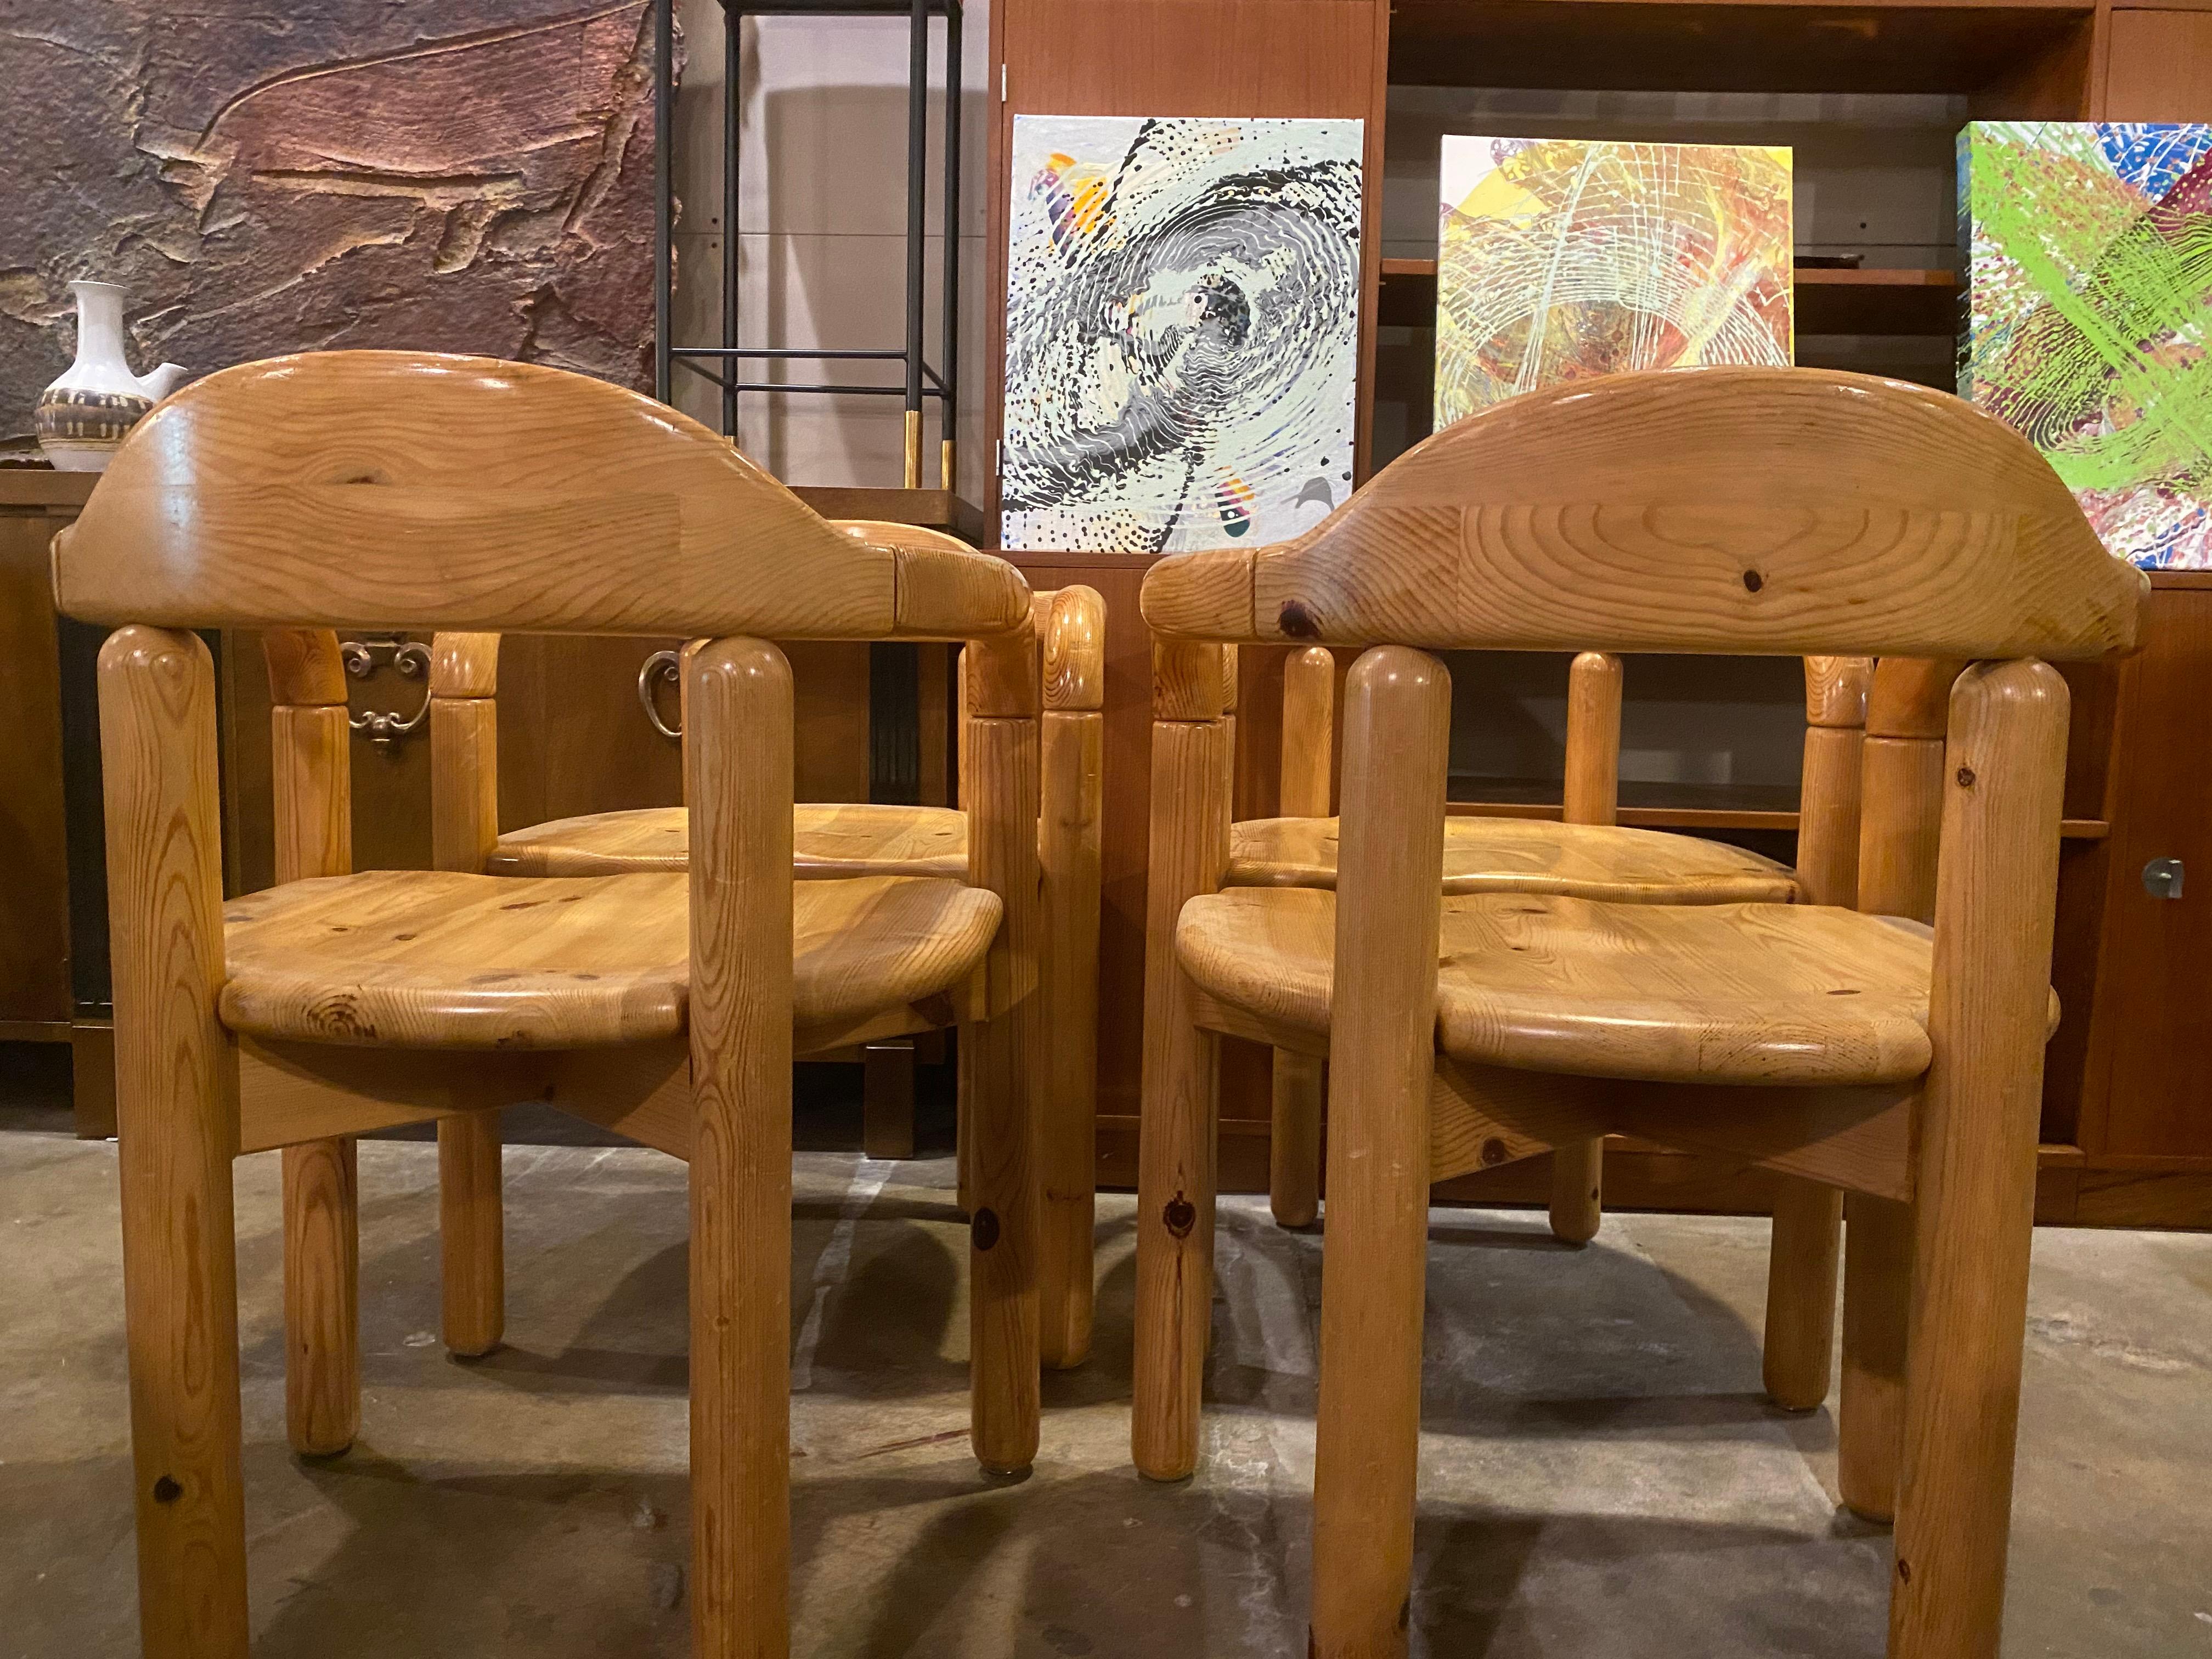 Set of beautiful solid pine Danish chairs by Rainer Daumiller come in a set of 4 feature curved arms and seating and are in good condition. Rainer Daumiller is a Postwar & Contemporary artist.